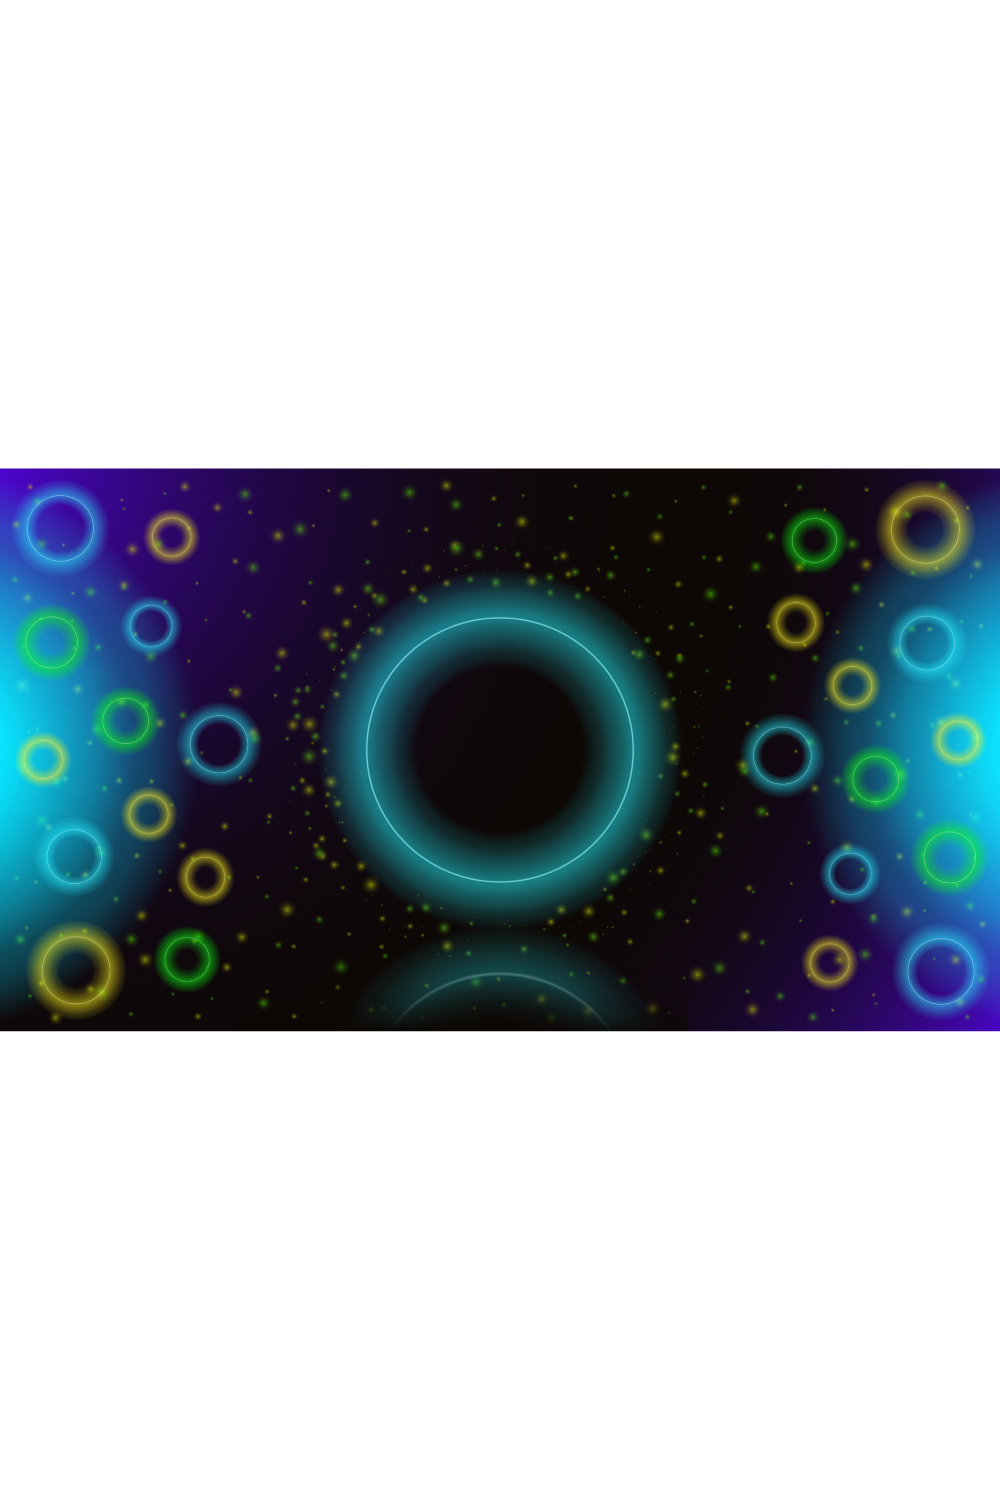 Abstract shiny glowing circle colorful background pinterest preview image.